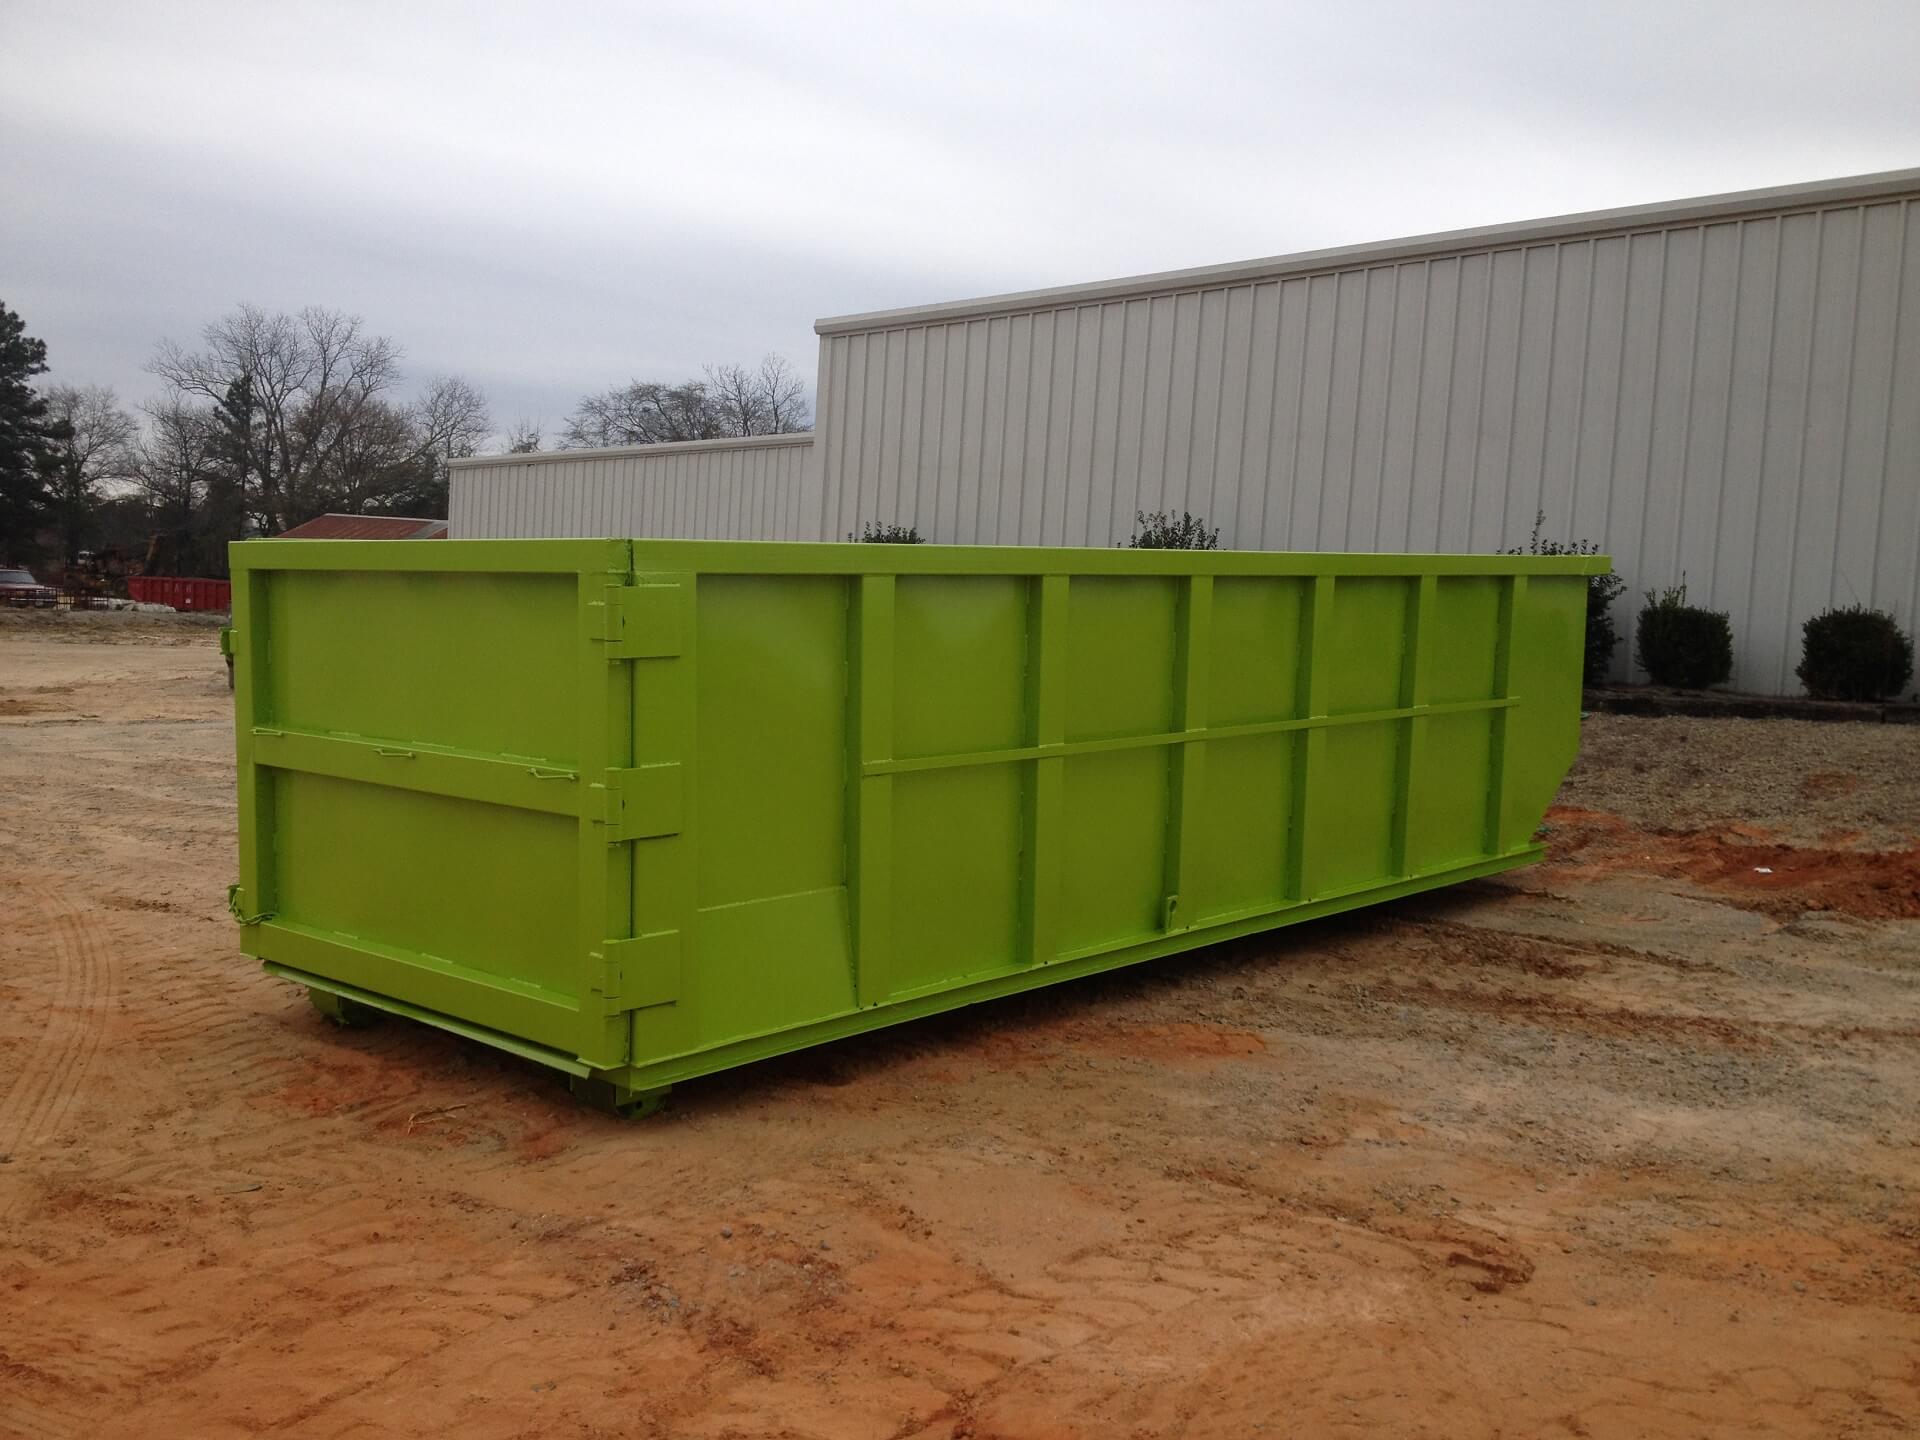 30 Cubic Yard Dumpster-Colorado Dumpster Services of Greeley